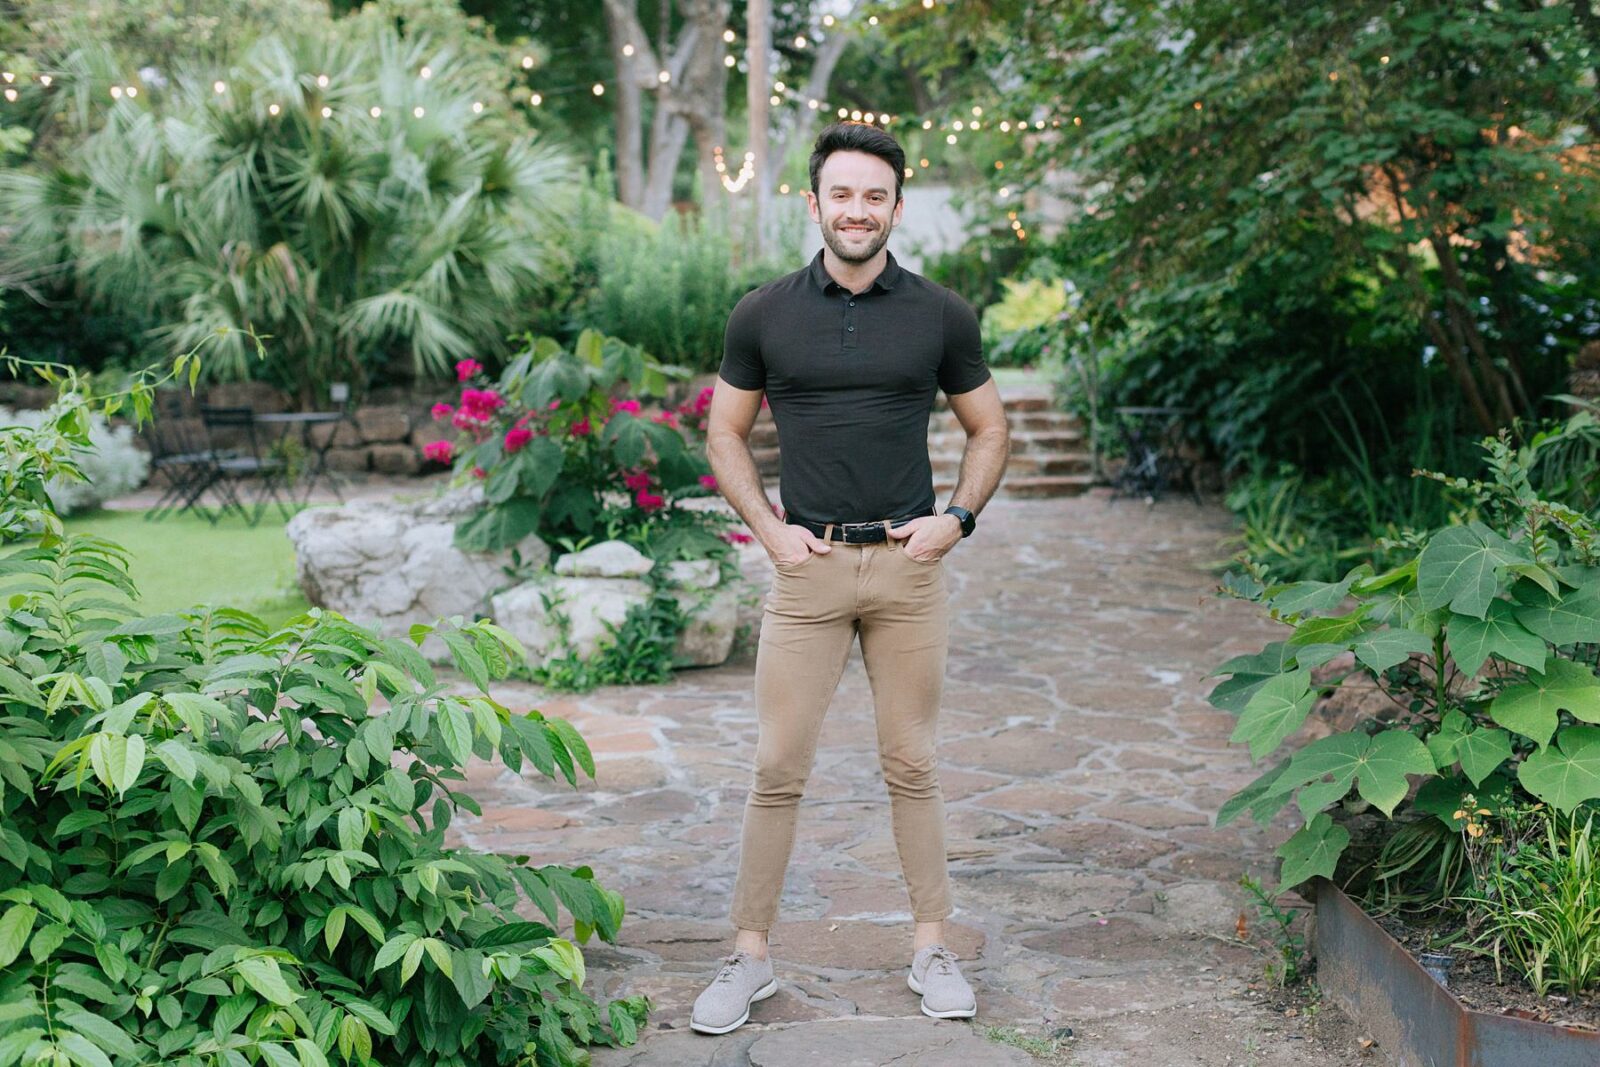 danny hatt, coordinator, planner, owner at hummingbird house, Austin Wedding at Hummingbird House, with wedding photos by Tara Lyons Photography. Other vendors: Mistique Makeup, Cana Events, Twin Flame Events, Simply Chic Event Rentals, Live Oak Photo Booth